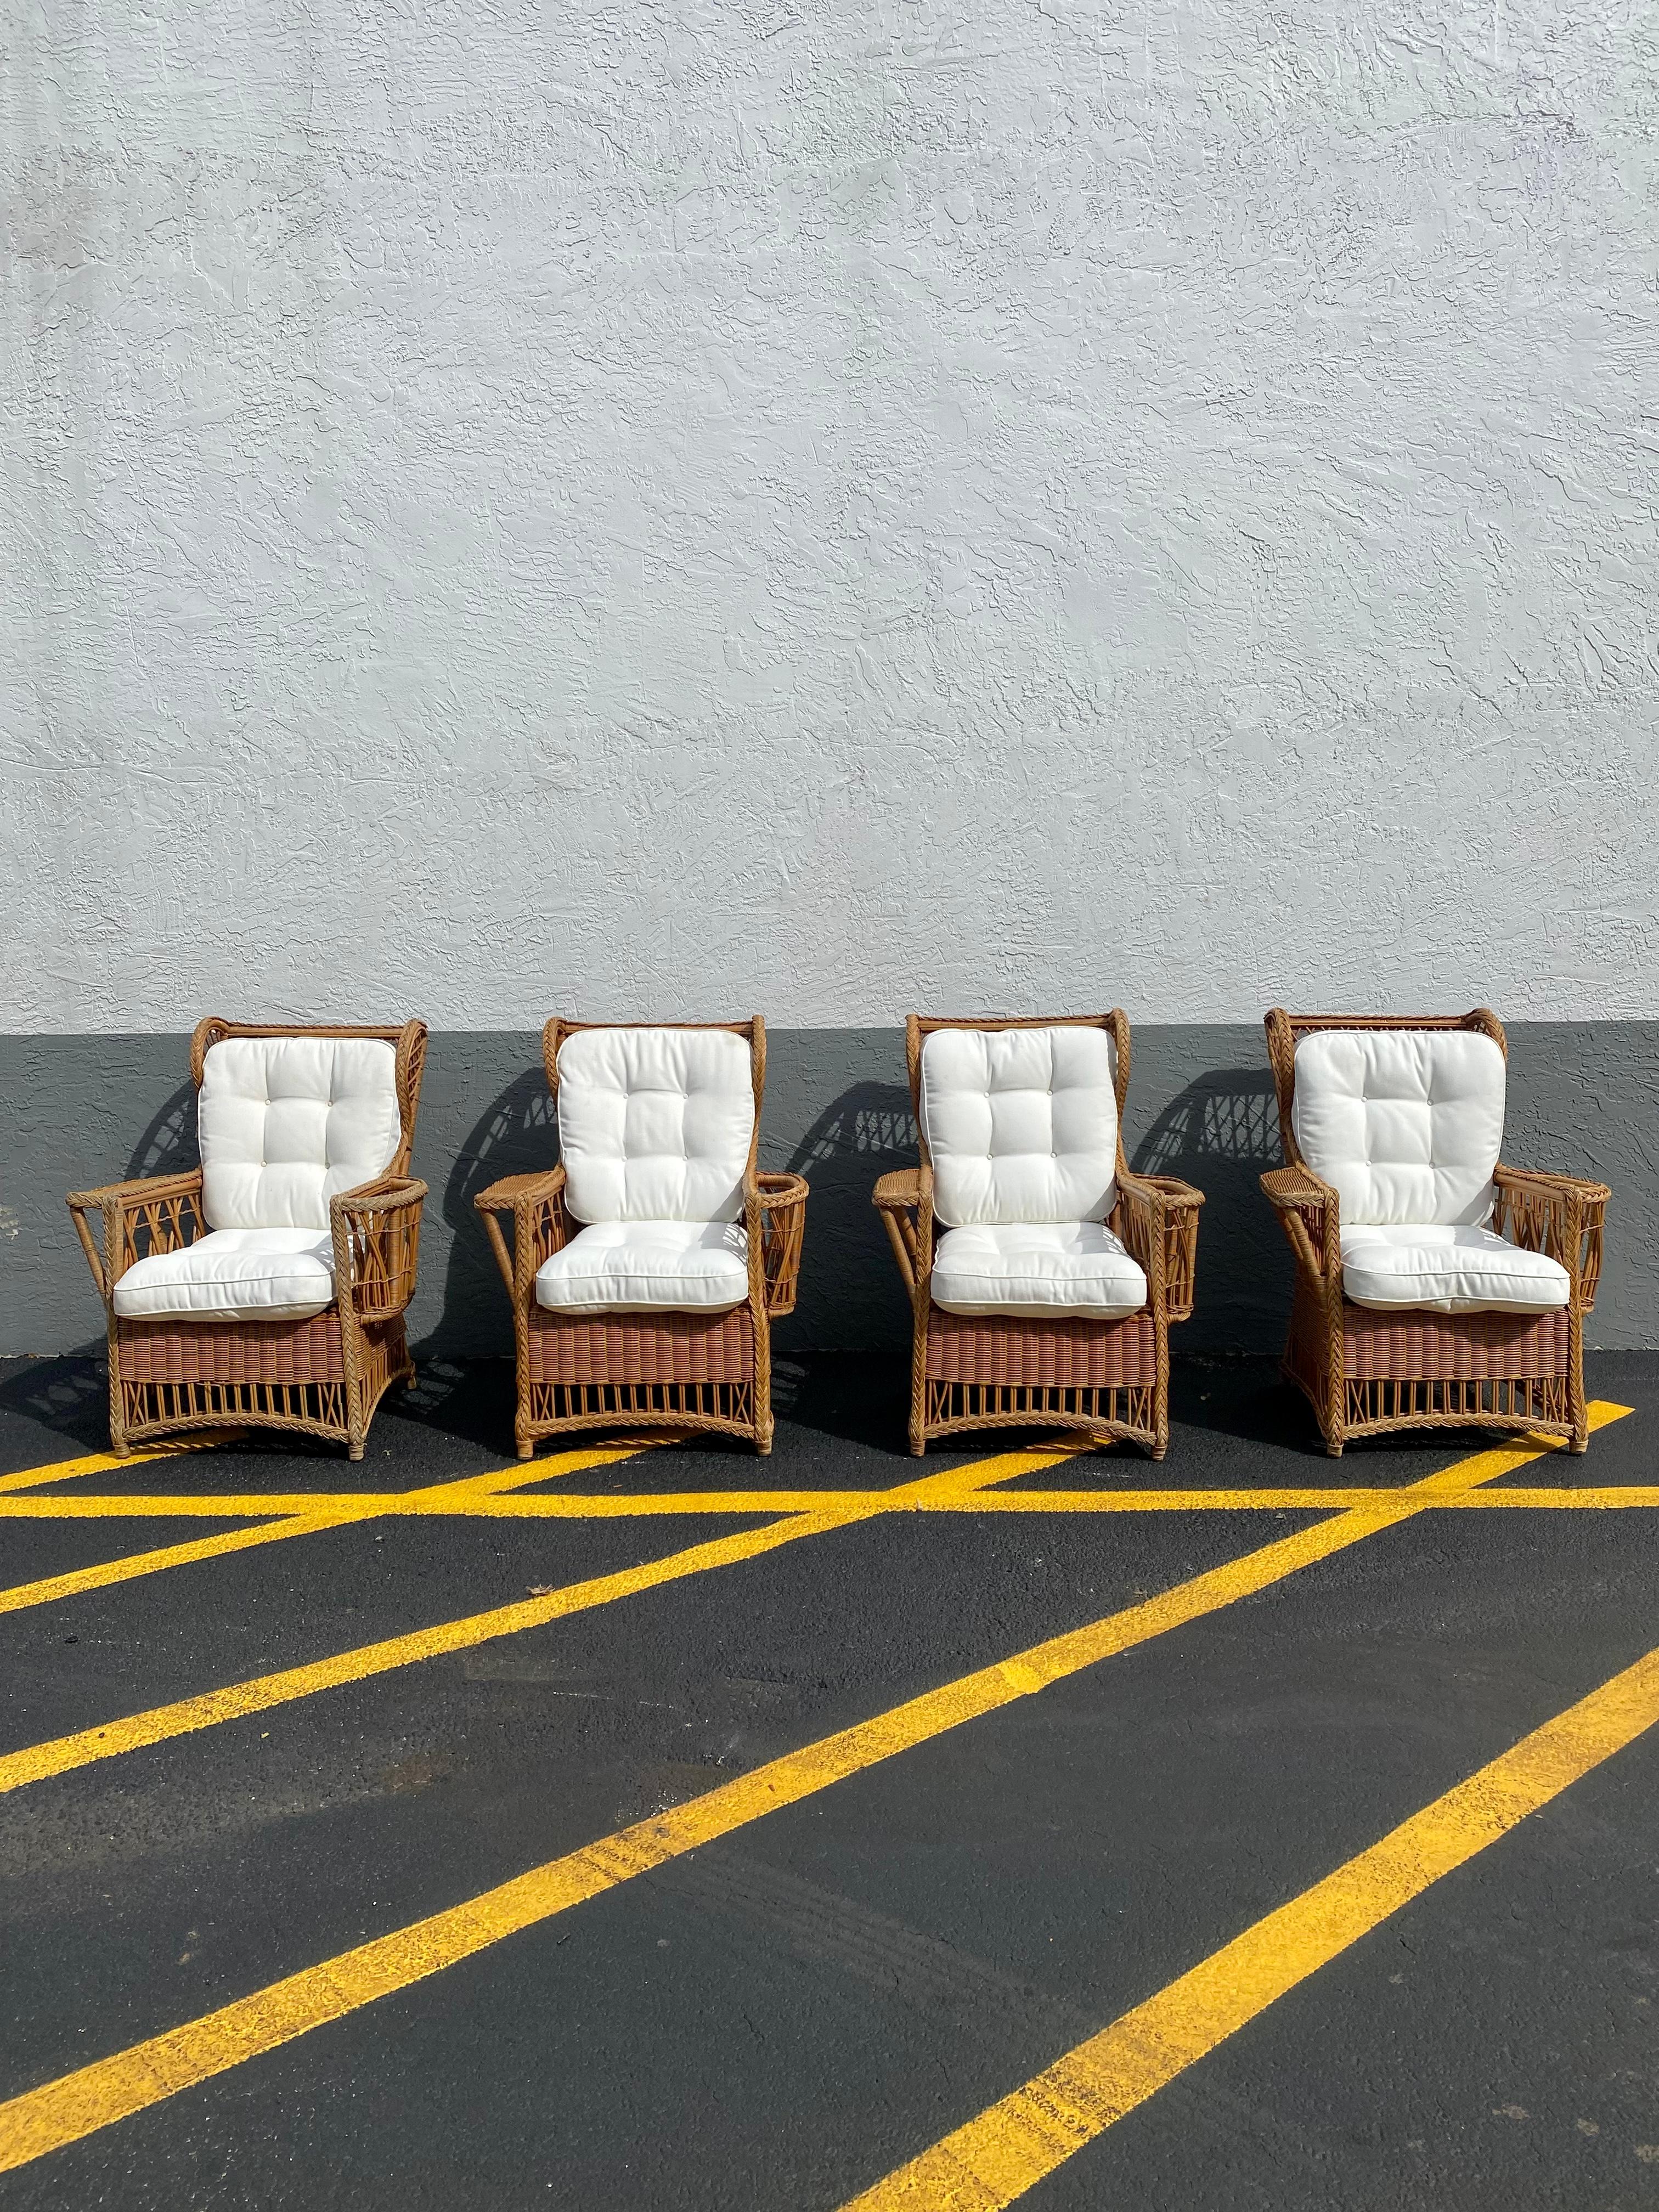 On offer on this occasion is one of the most stunning, rare, rattan President club chairs set you could hope to find. Outstanding design is exhibited throughout. The beautiful set is statement piece which is also extremely comfortable and packed